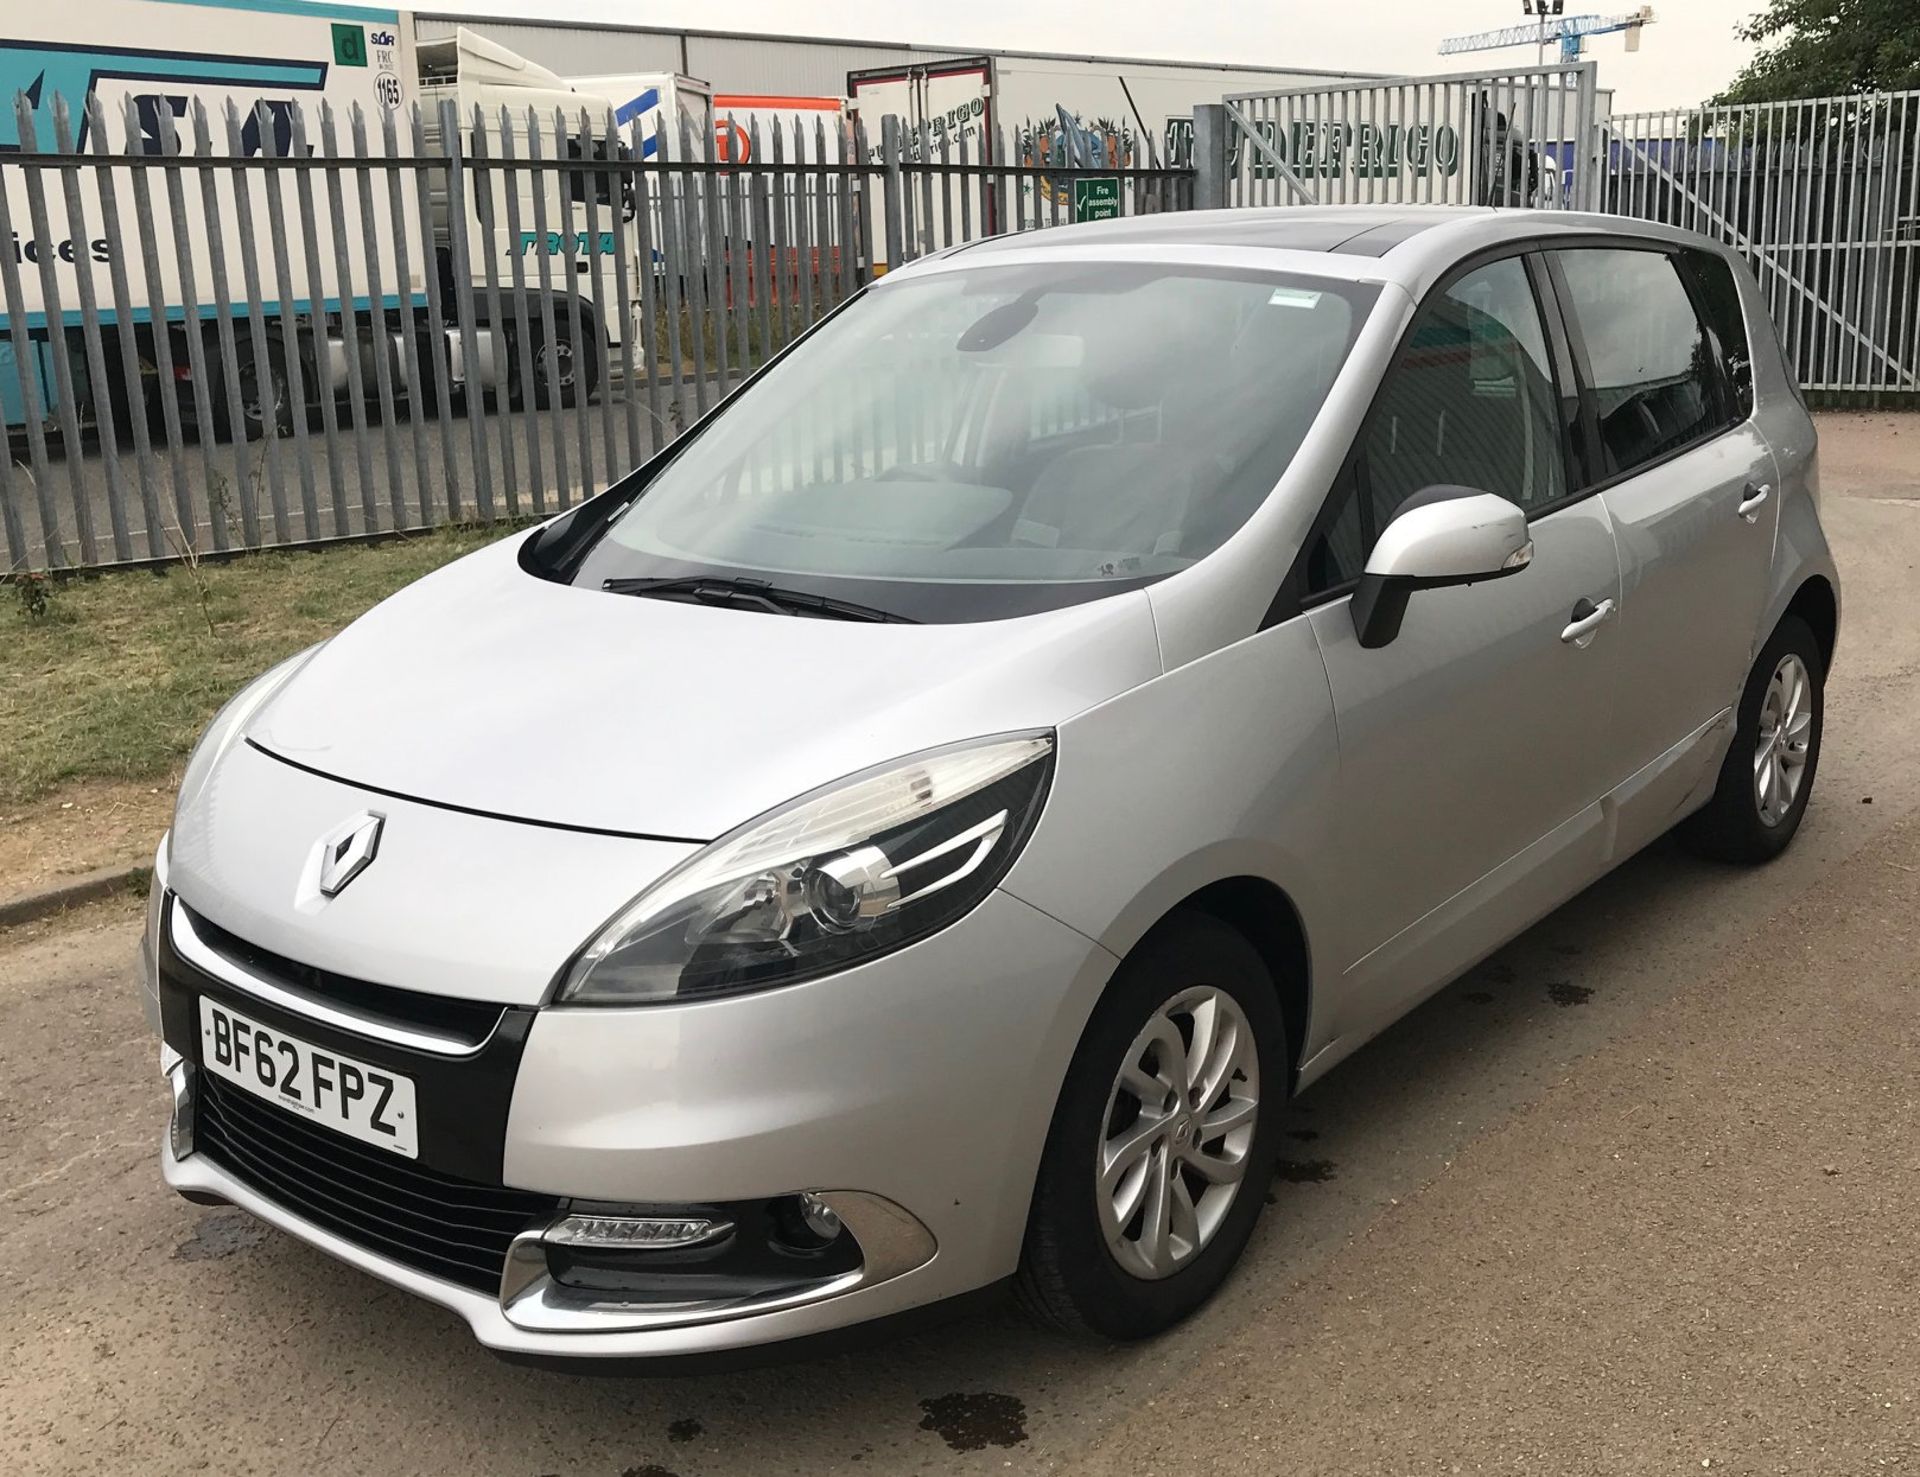 2012 Renault Scenic 1.5 Dci D-Que Tt Energy 5 Dr MPV - CL505 - NO VAT ON THE HAMMER - Location: Corb - Image 8 of 15